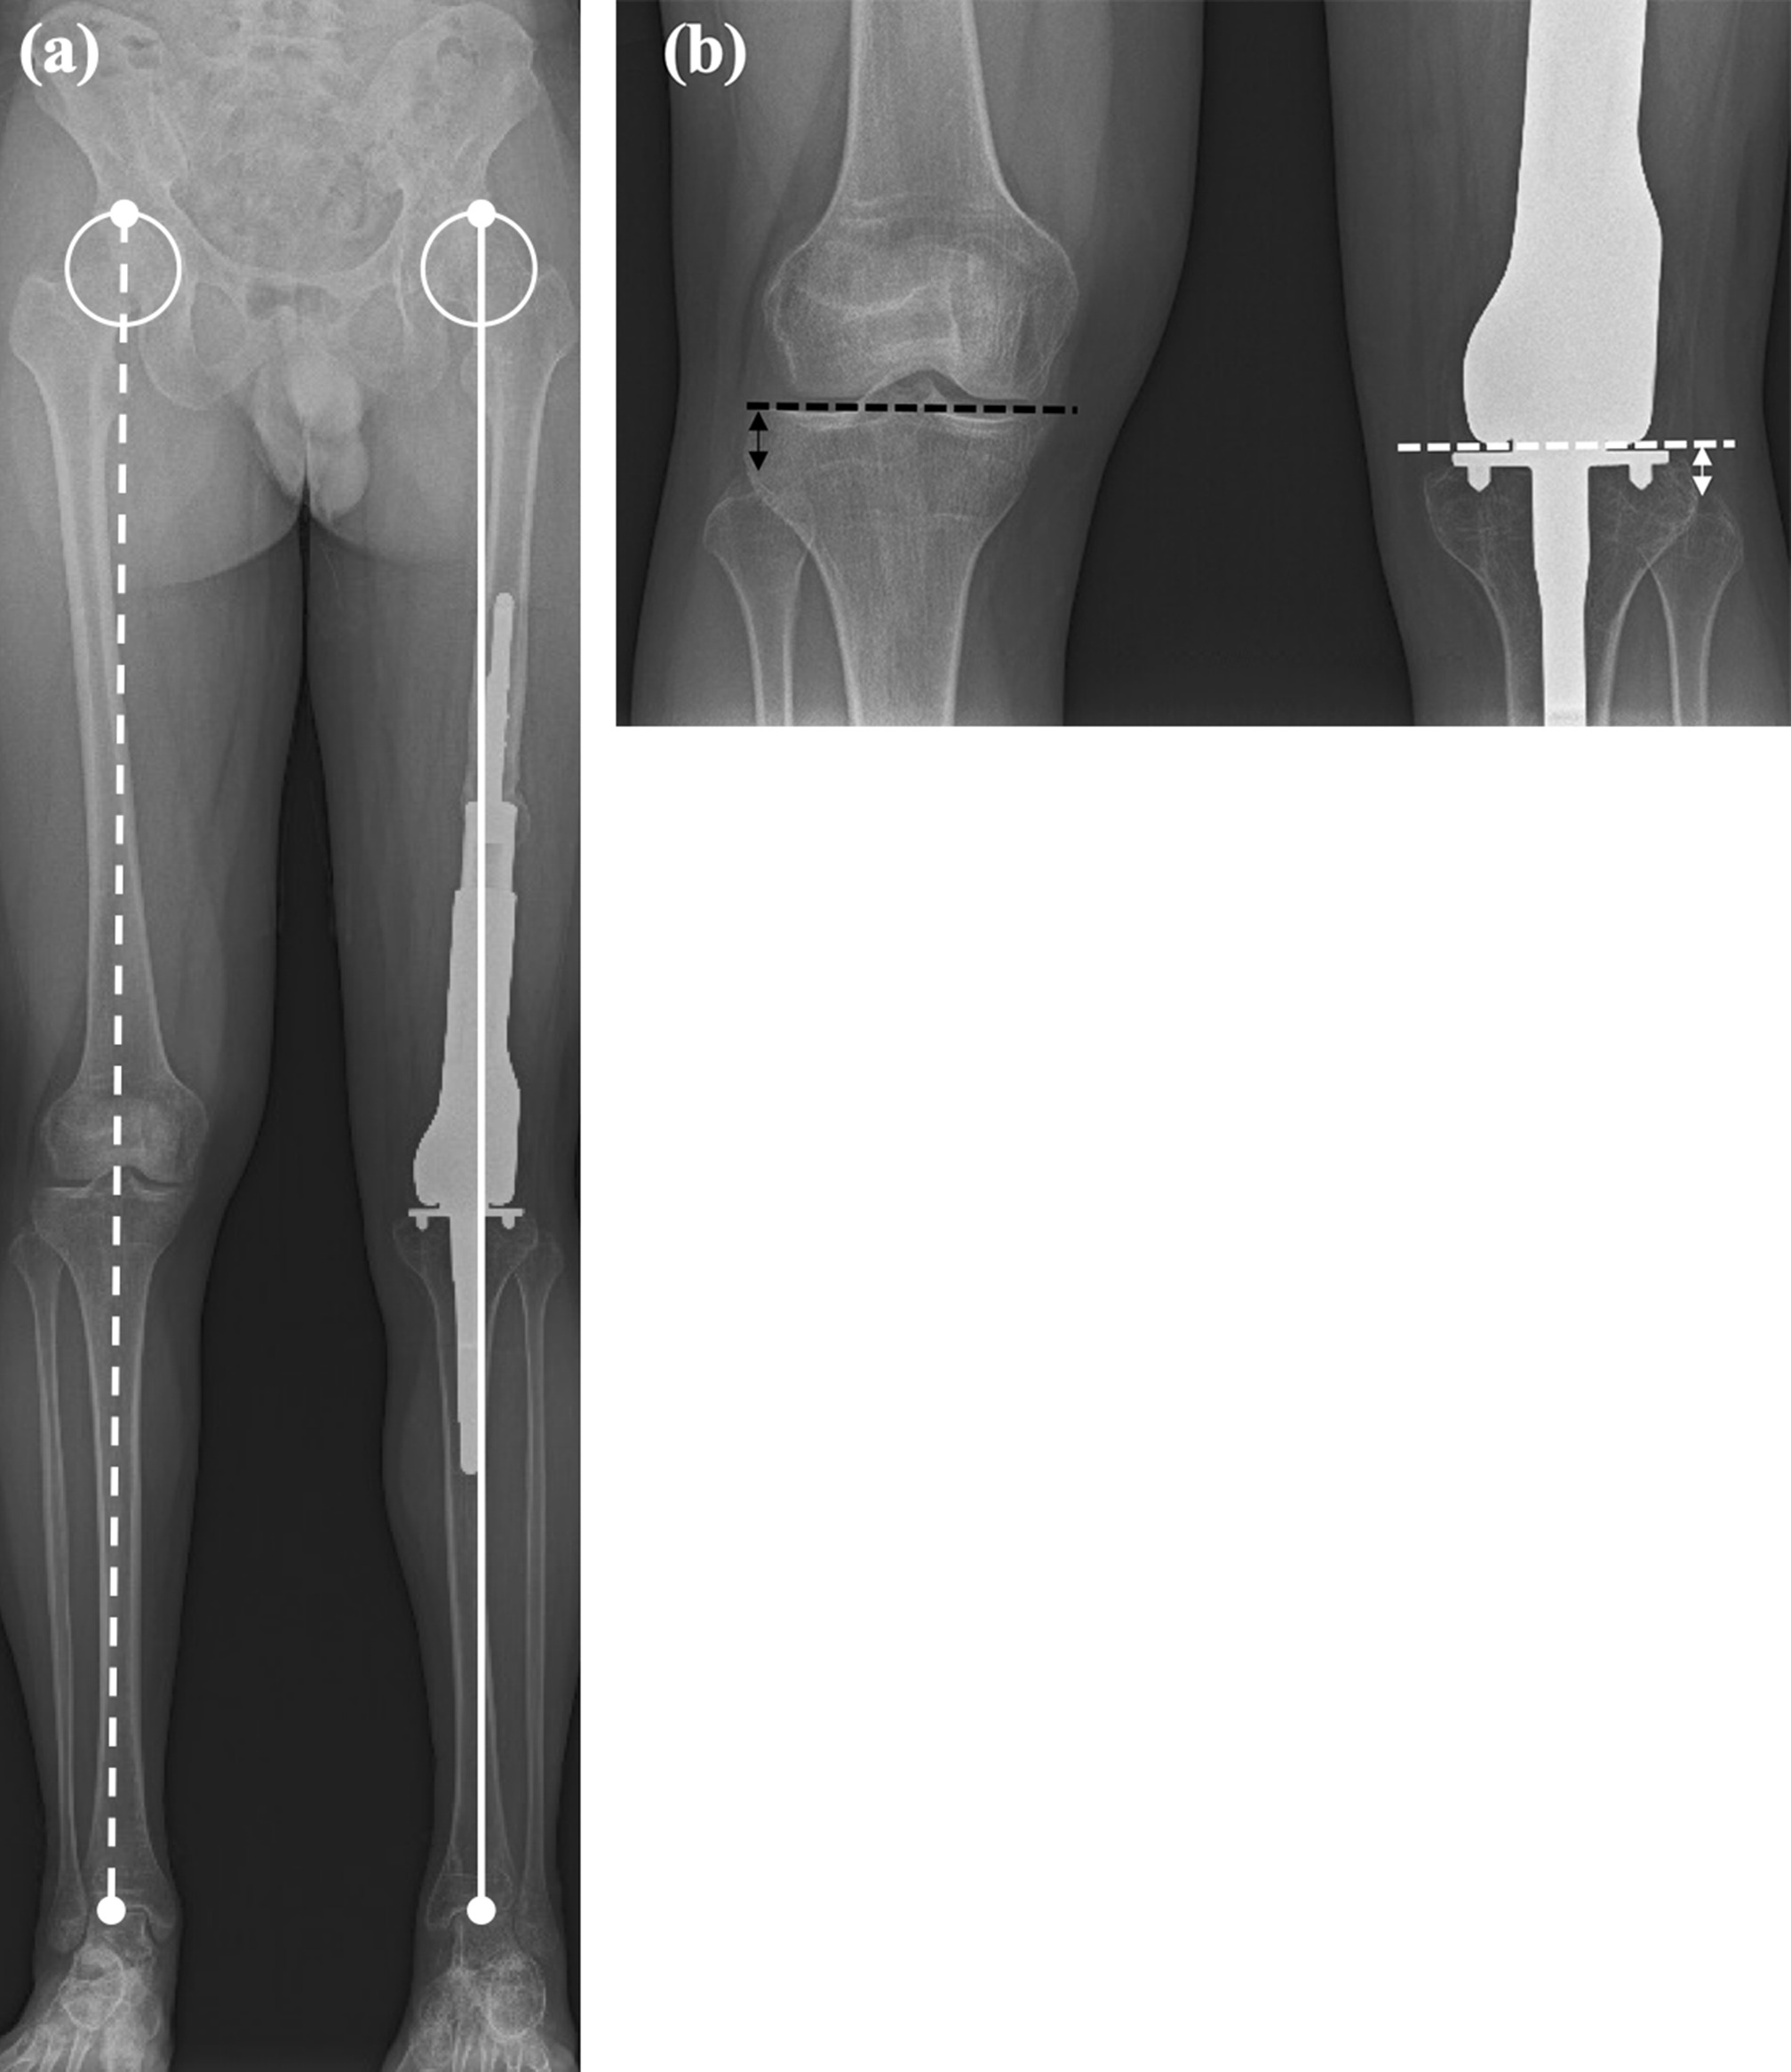 Fig. 2 
            a) Leg length was measured as the distance between the top of the femoral head and the centre of the ankle joint. The leg length discrepancy with the opposite lower leg was calculated. b) Measurement of joint line height. On the operative side, the distance from the fibular head to a line connecting the most distal points of the medial and lateral femoral condyle (white dashed line) was measured. On the opposite side, the distance from the fibular head to the mid-line through the joint space (black dashed line) was measured.
          